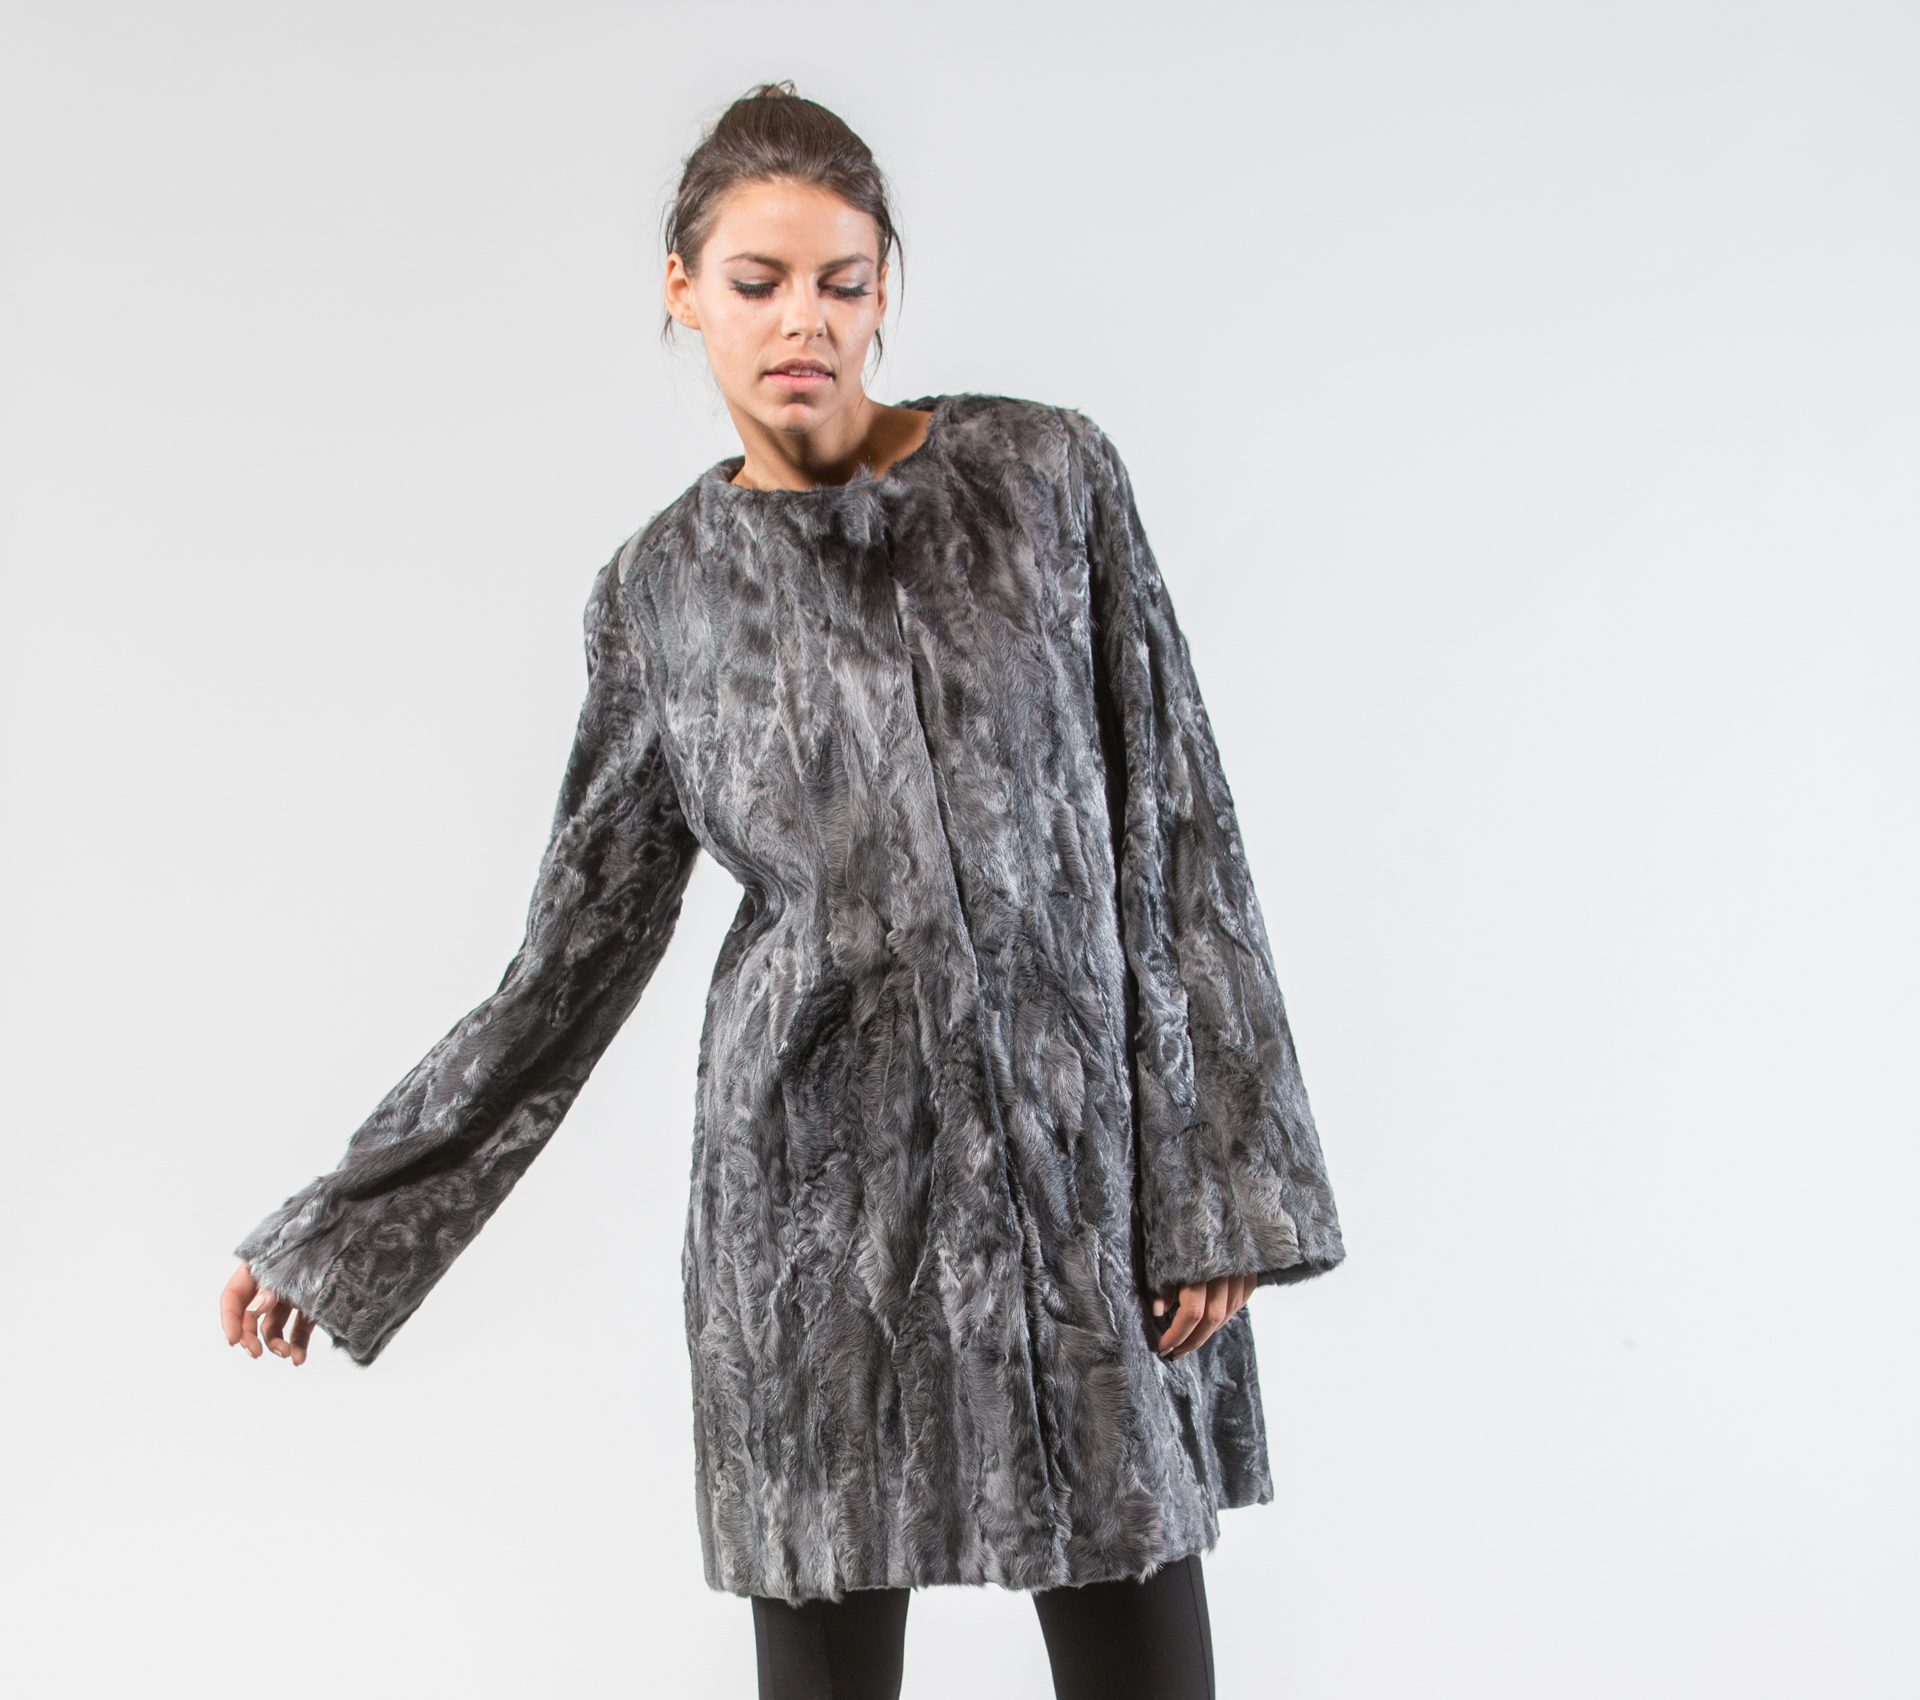 Blue Gray Astrakhan Fur Jacket . 100% Real Fur Coats and Accessories.